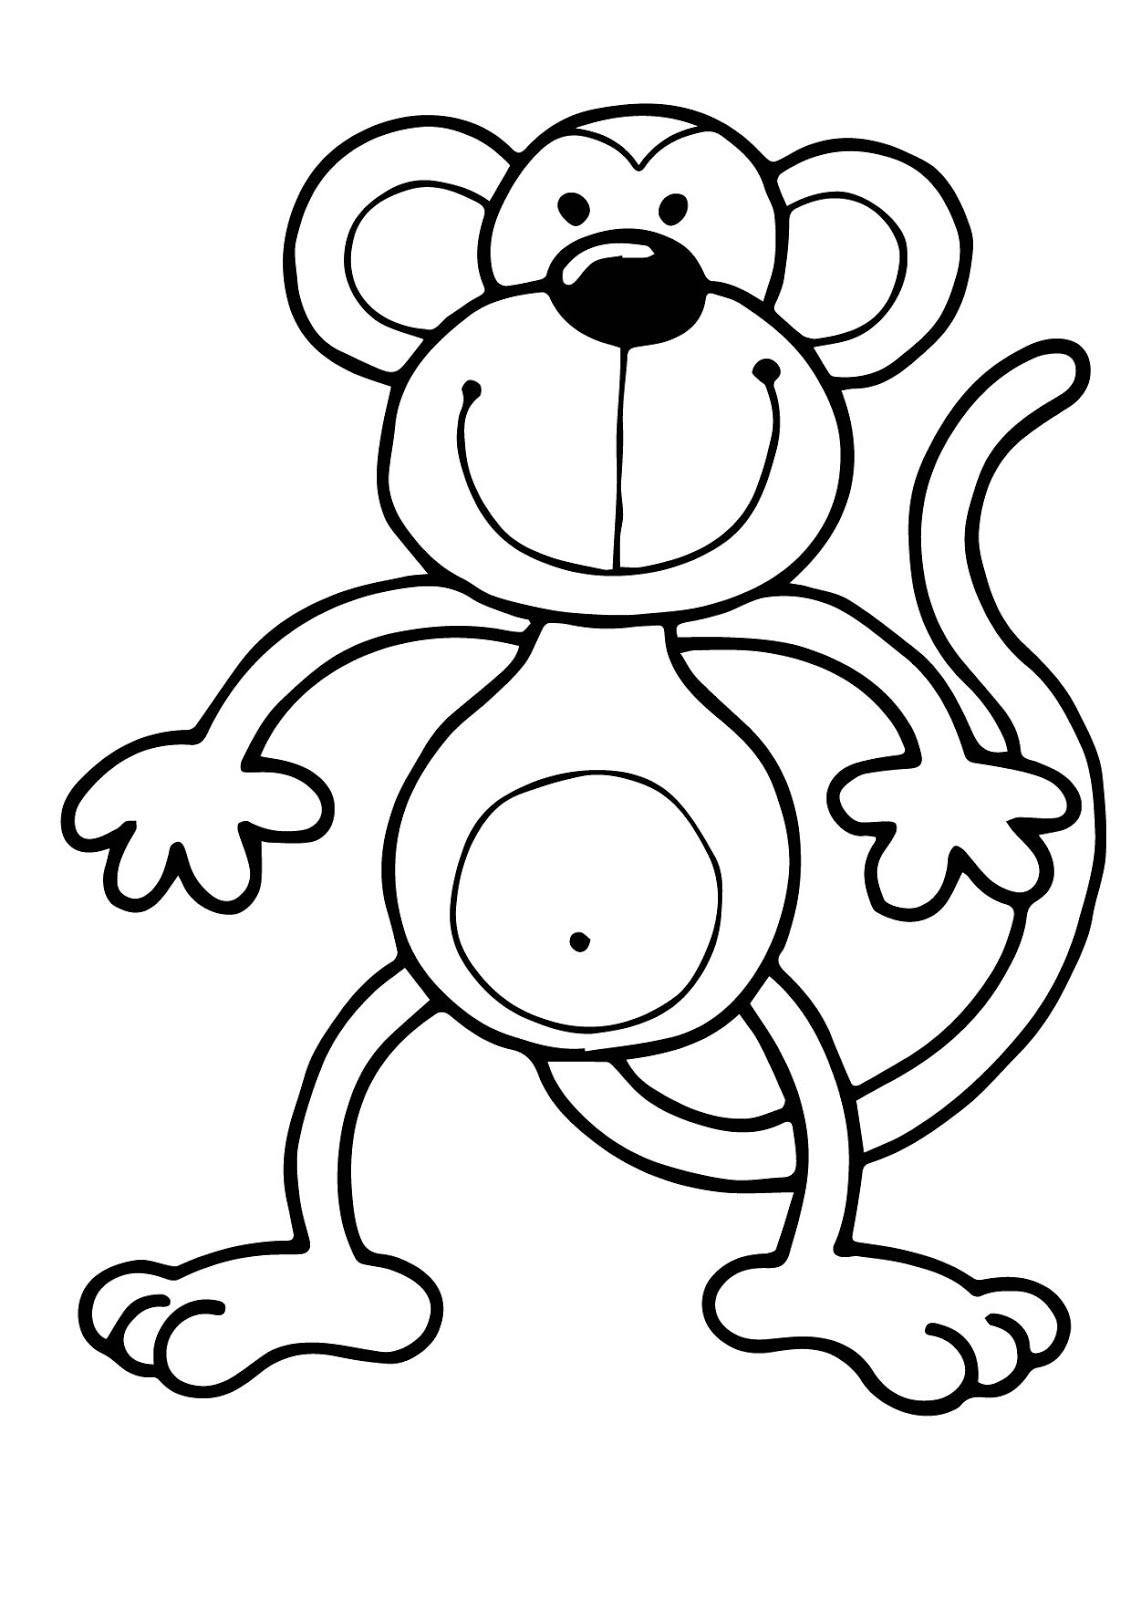 Coloring Pages For Toddlers
 Riscos graciosos Cute Drawings Riscos de macaquinhos